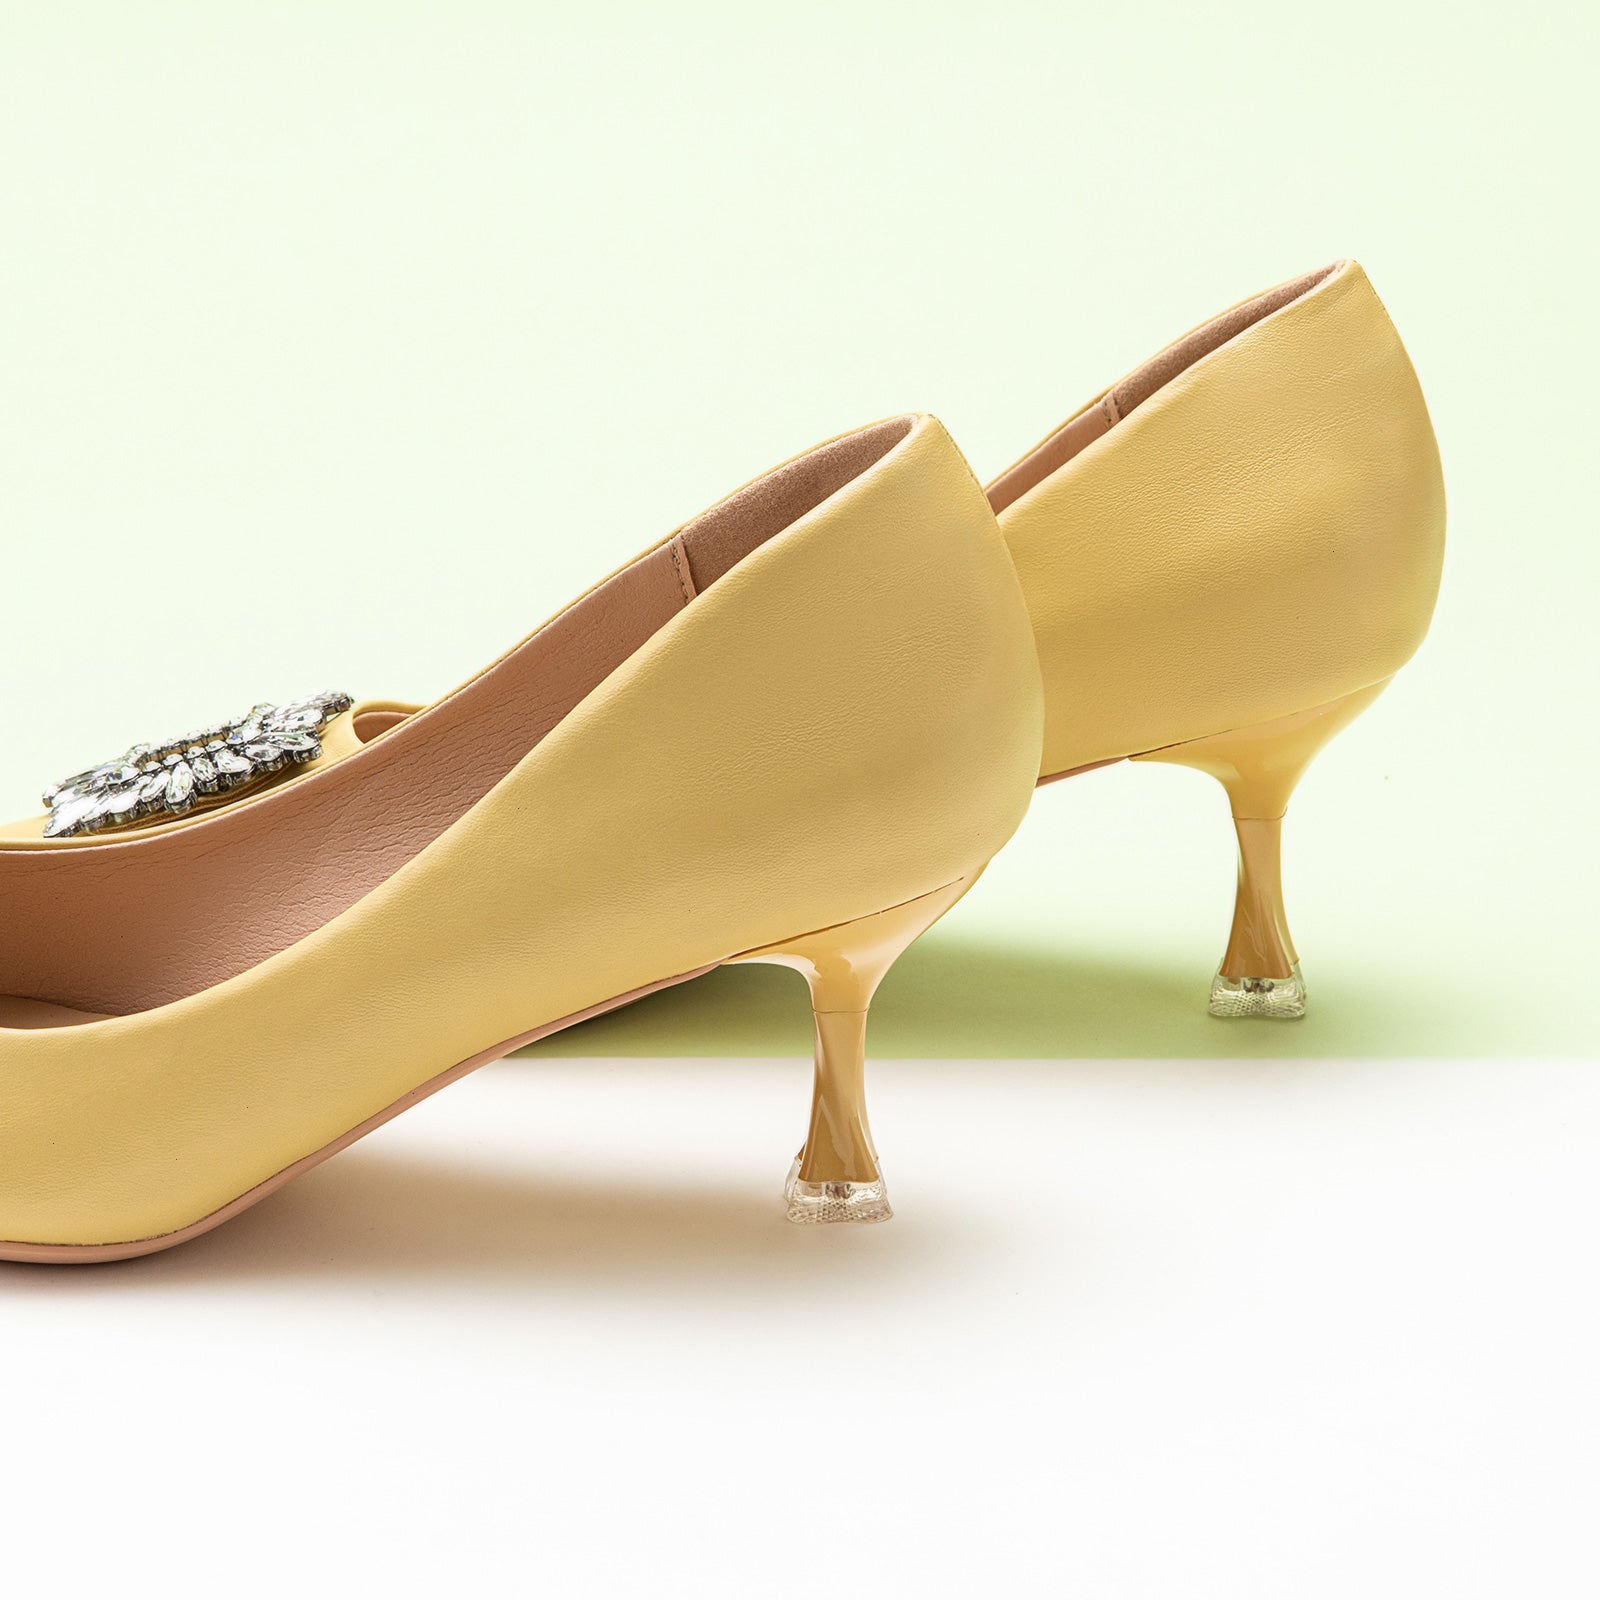 Embrace classic style with a twist of boldness with these yellow pumps, featuring sparkling crystal details and a delightful buckle for a statement look.